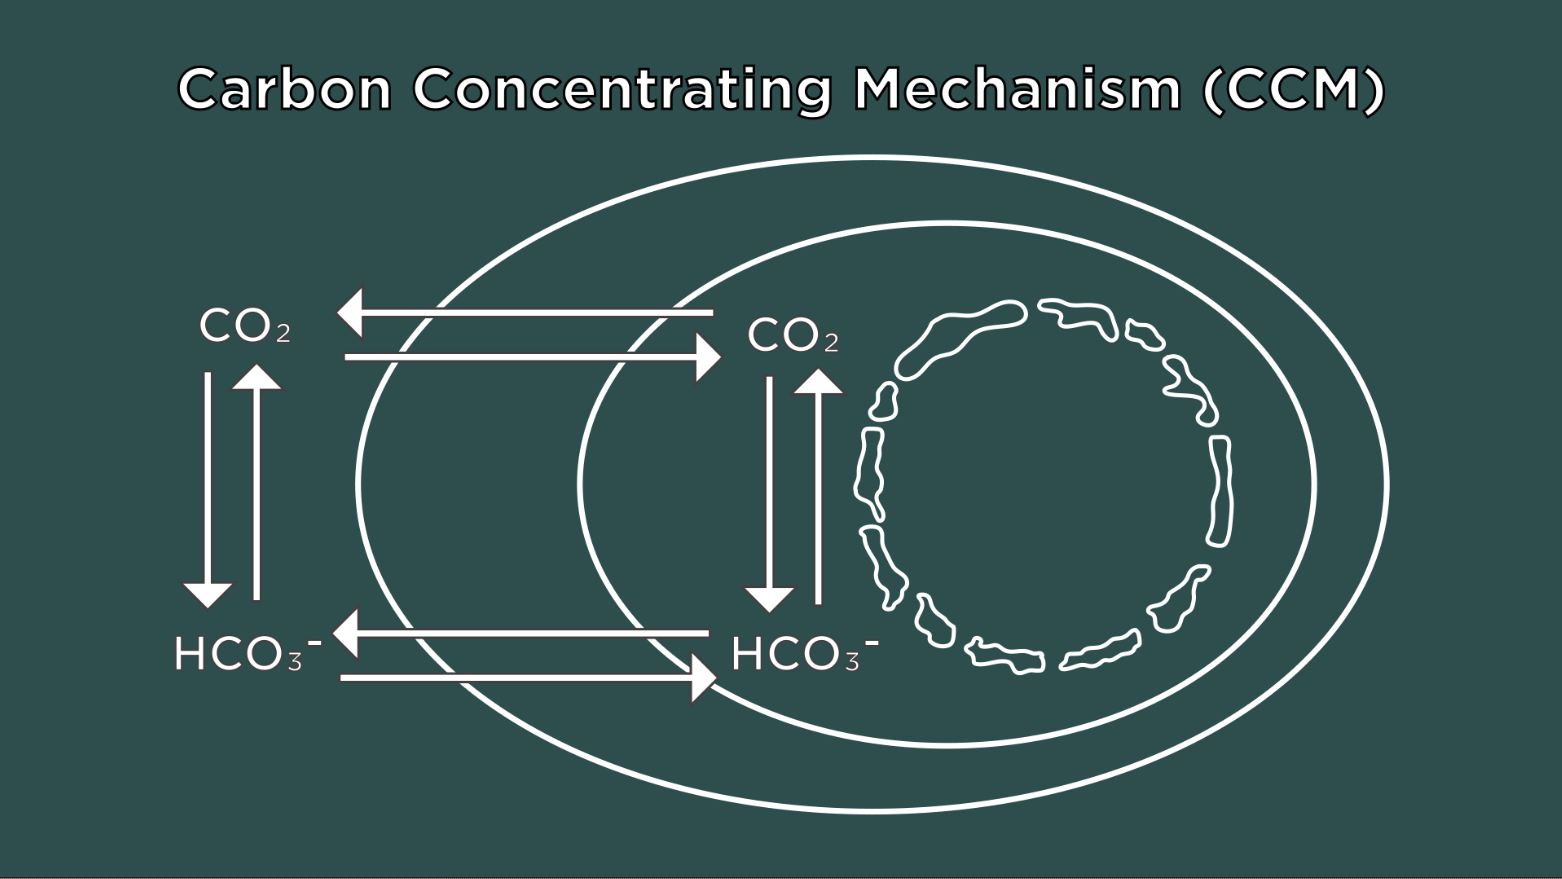 The Carbon Concentrating Mechanism